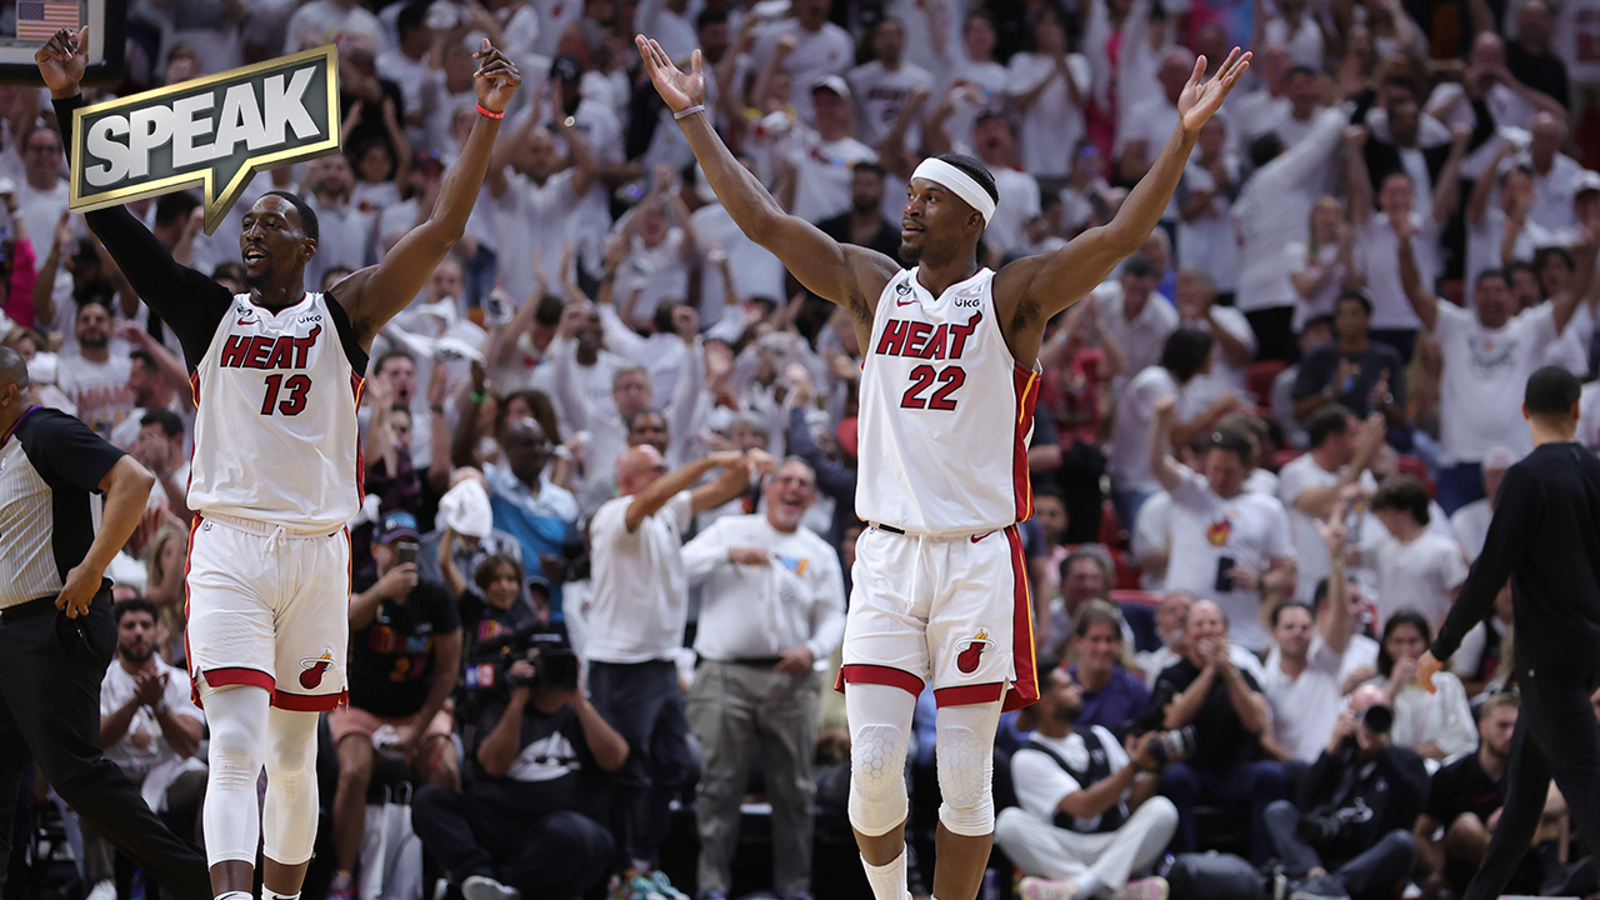 Miami nice: Sportsbooks rooting for Miami Heat, Florida Panthers titles